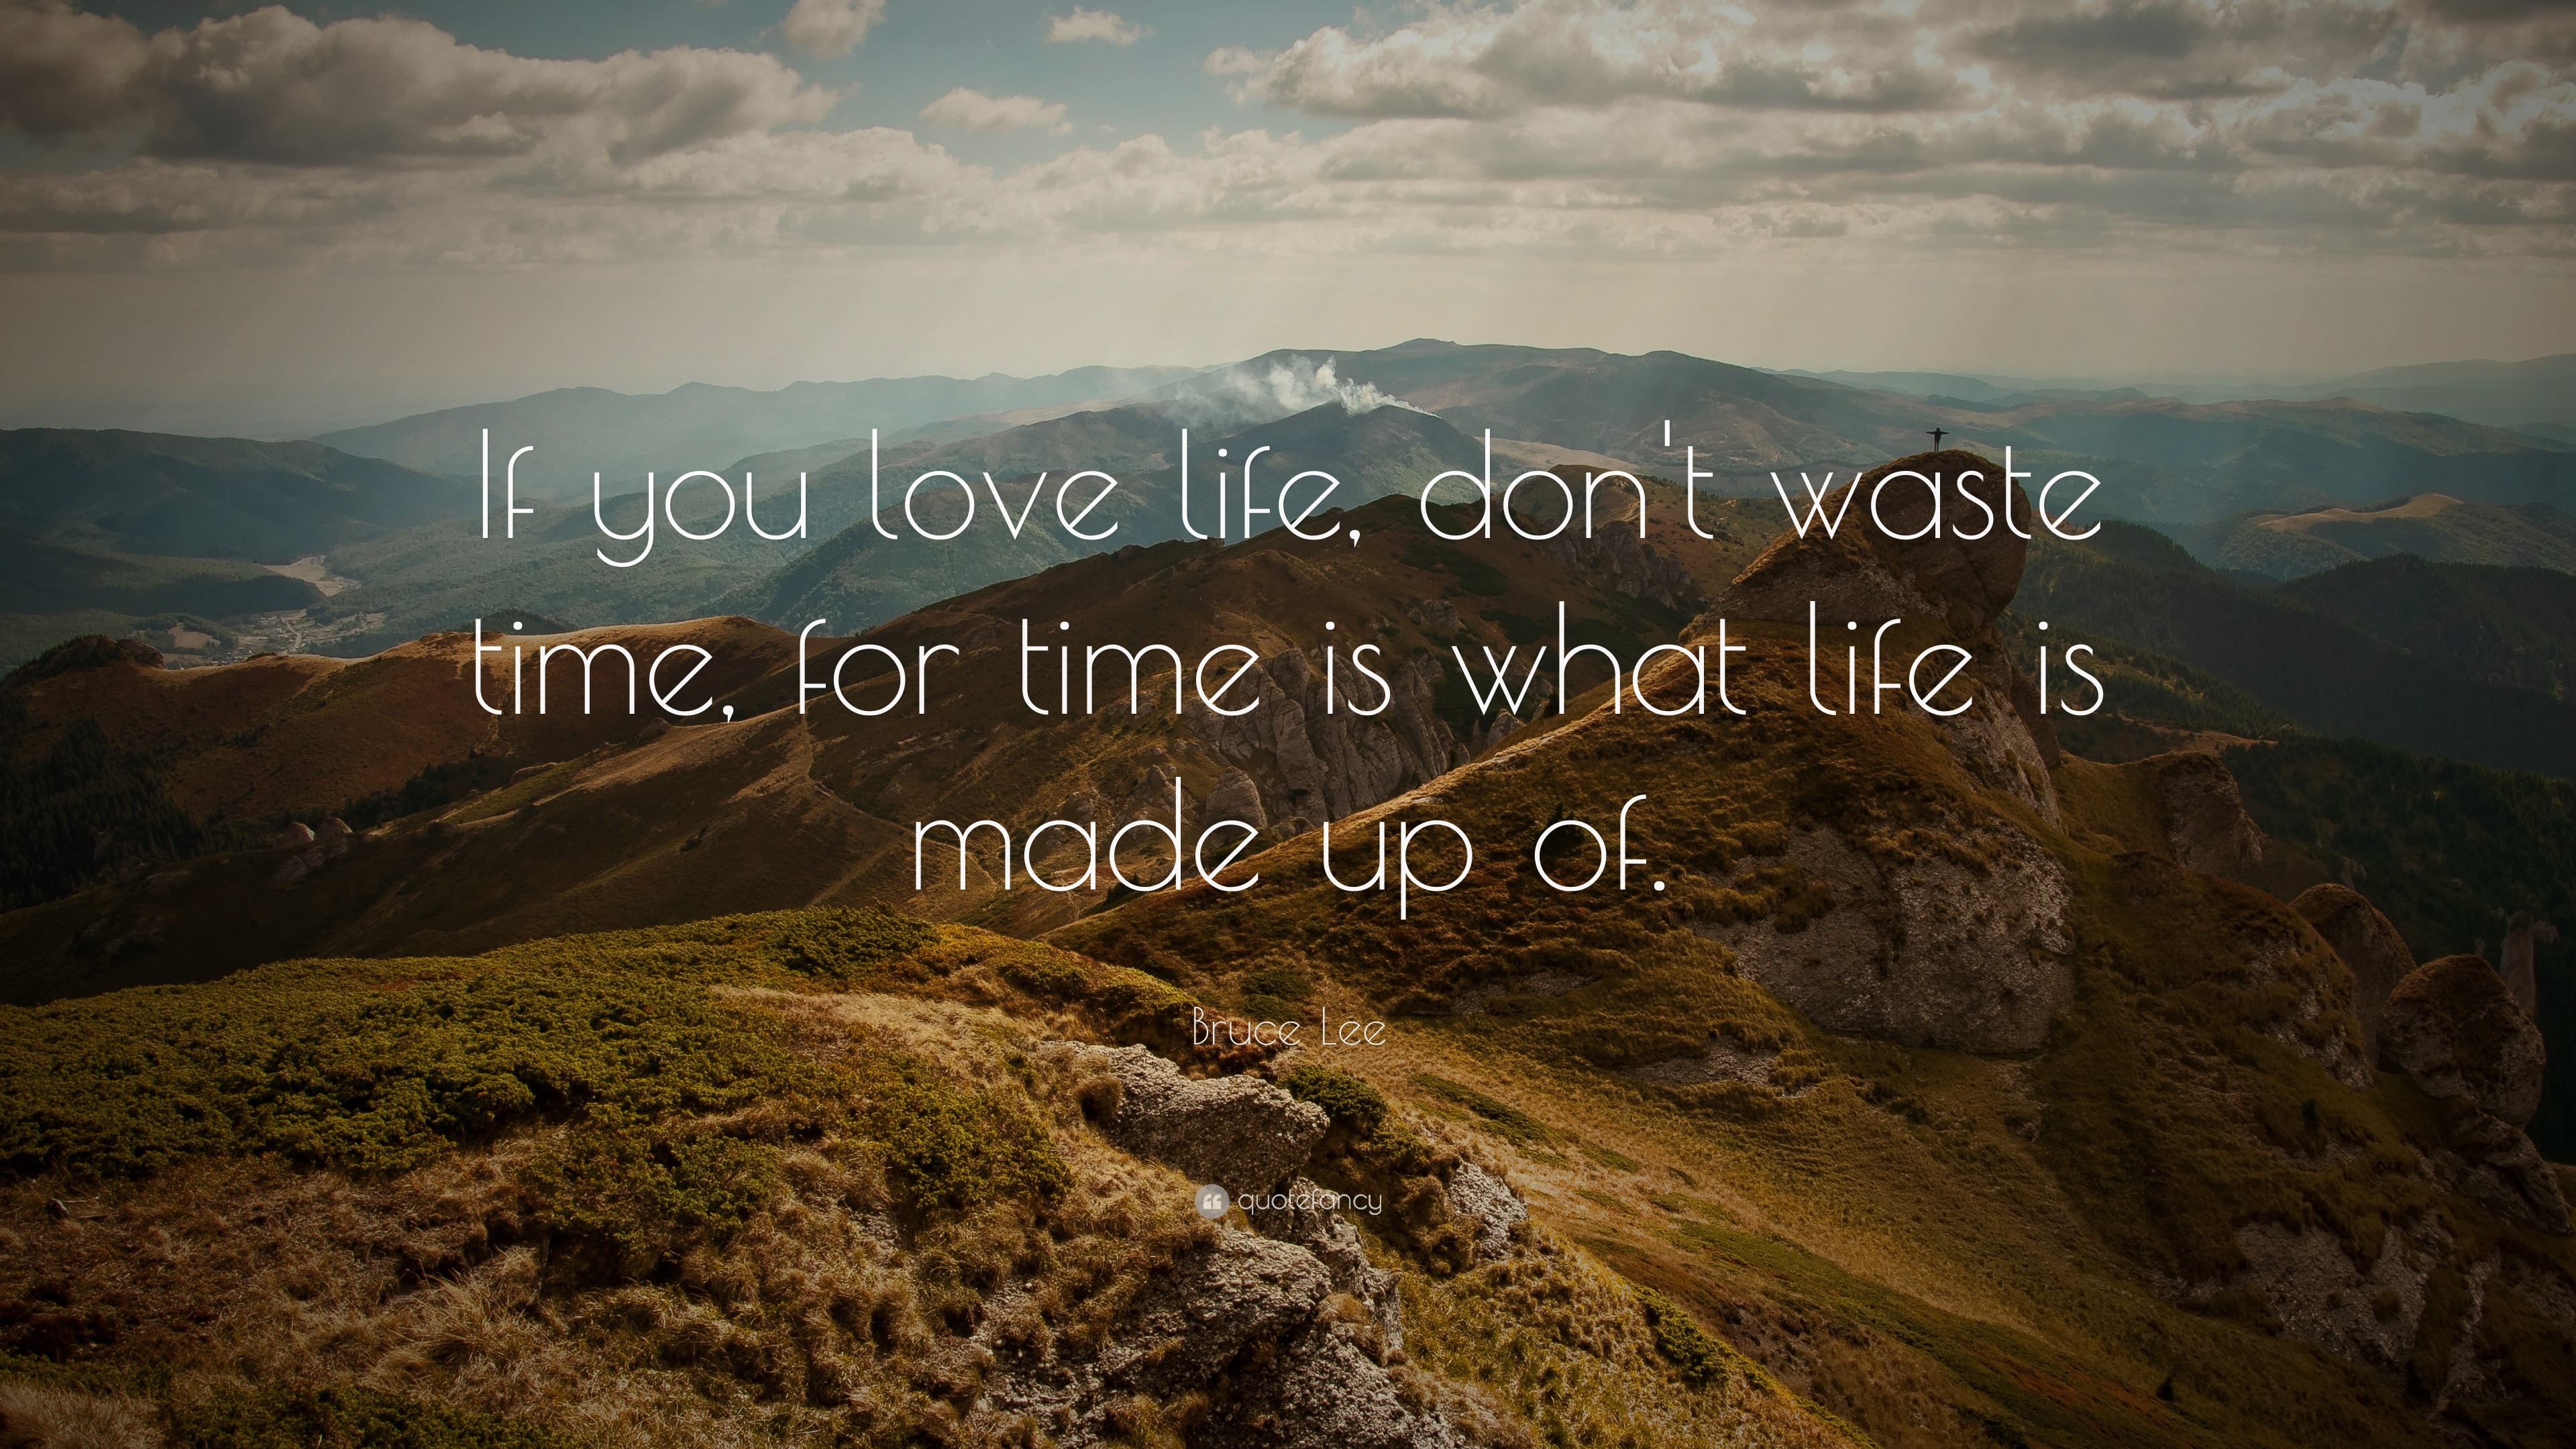 Bruce Lee Quote: “If you love life, don’t waste time, for time is what